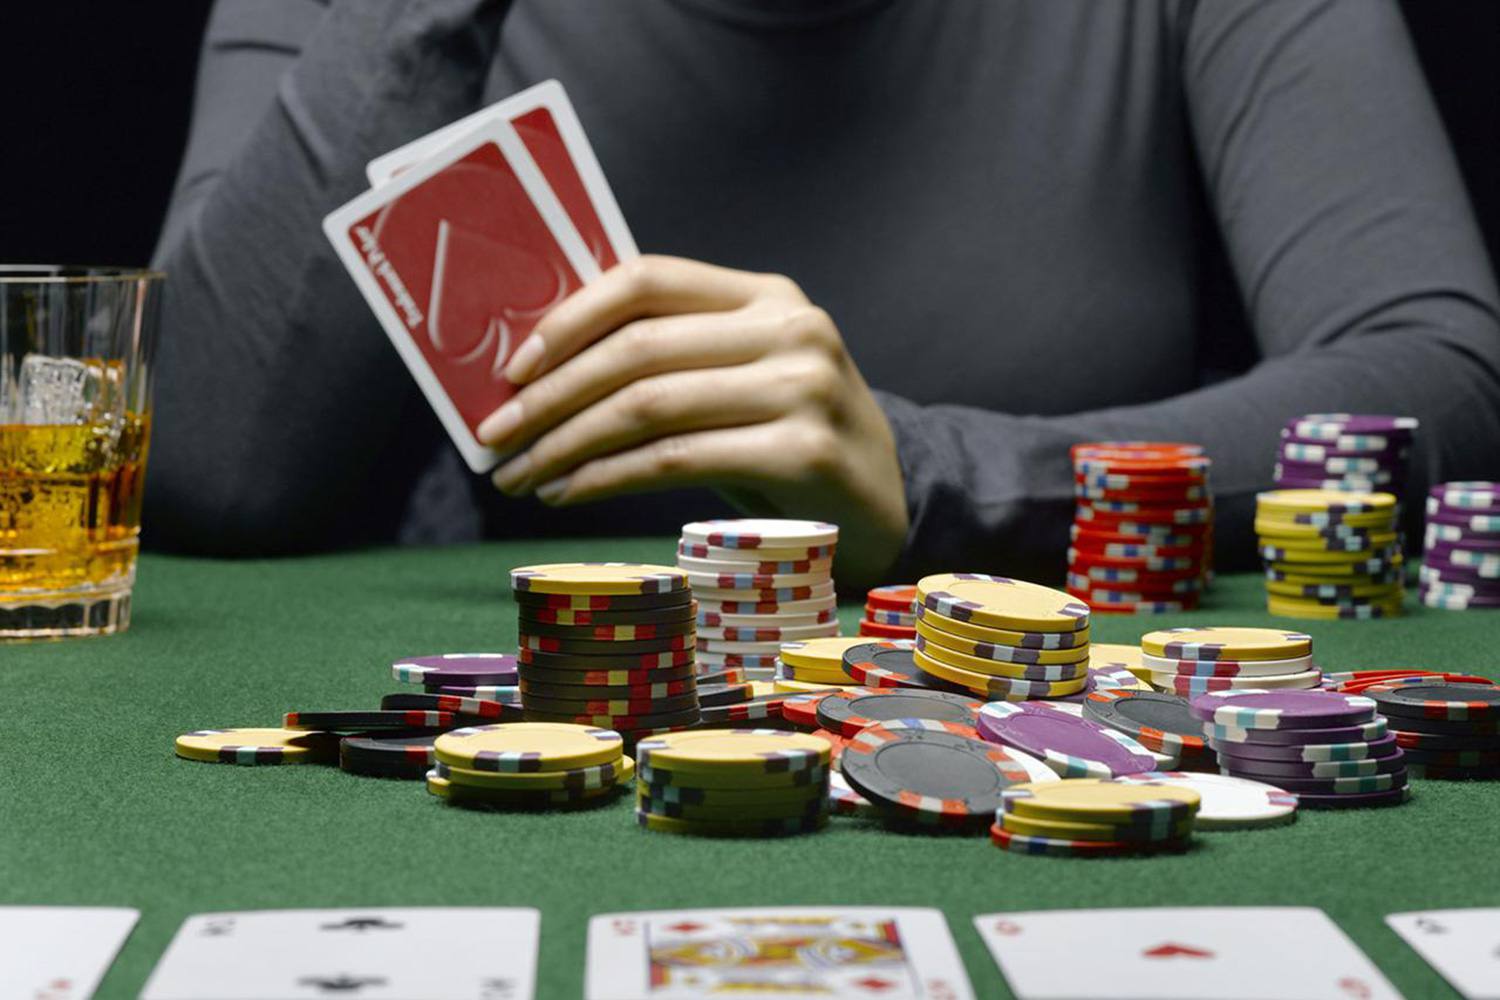 A Poker Player Lies About Cancer Diagnosis To Enter World Series Of Poker